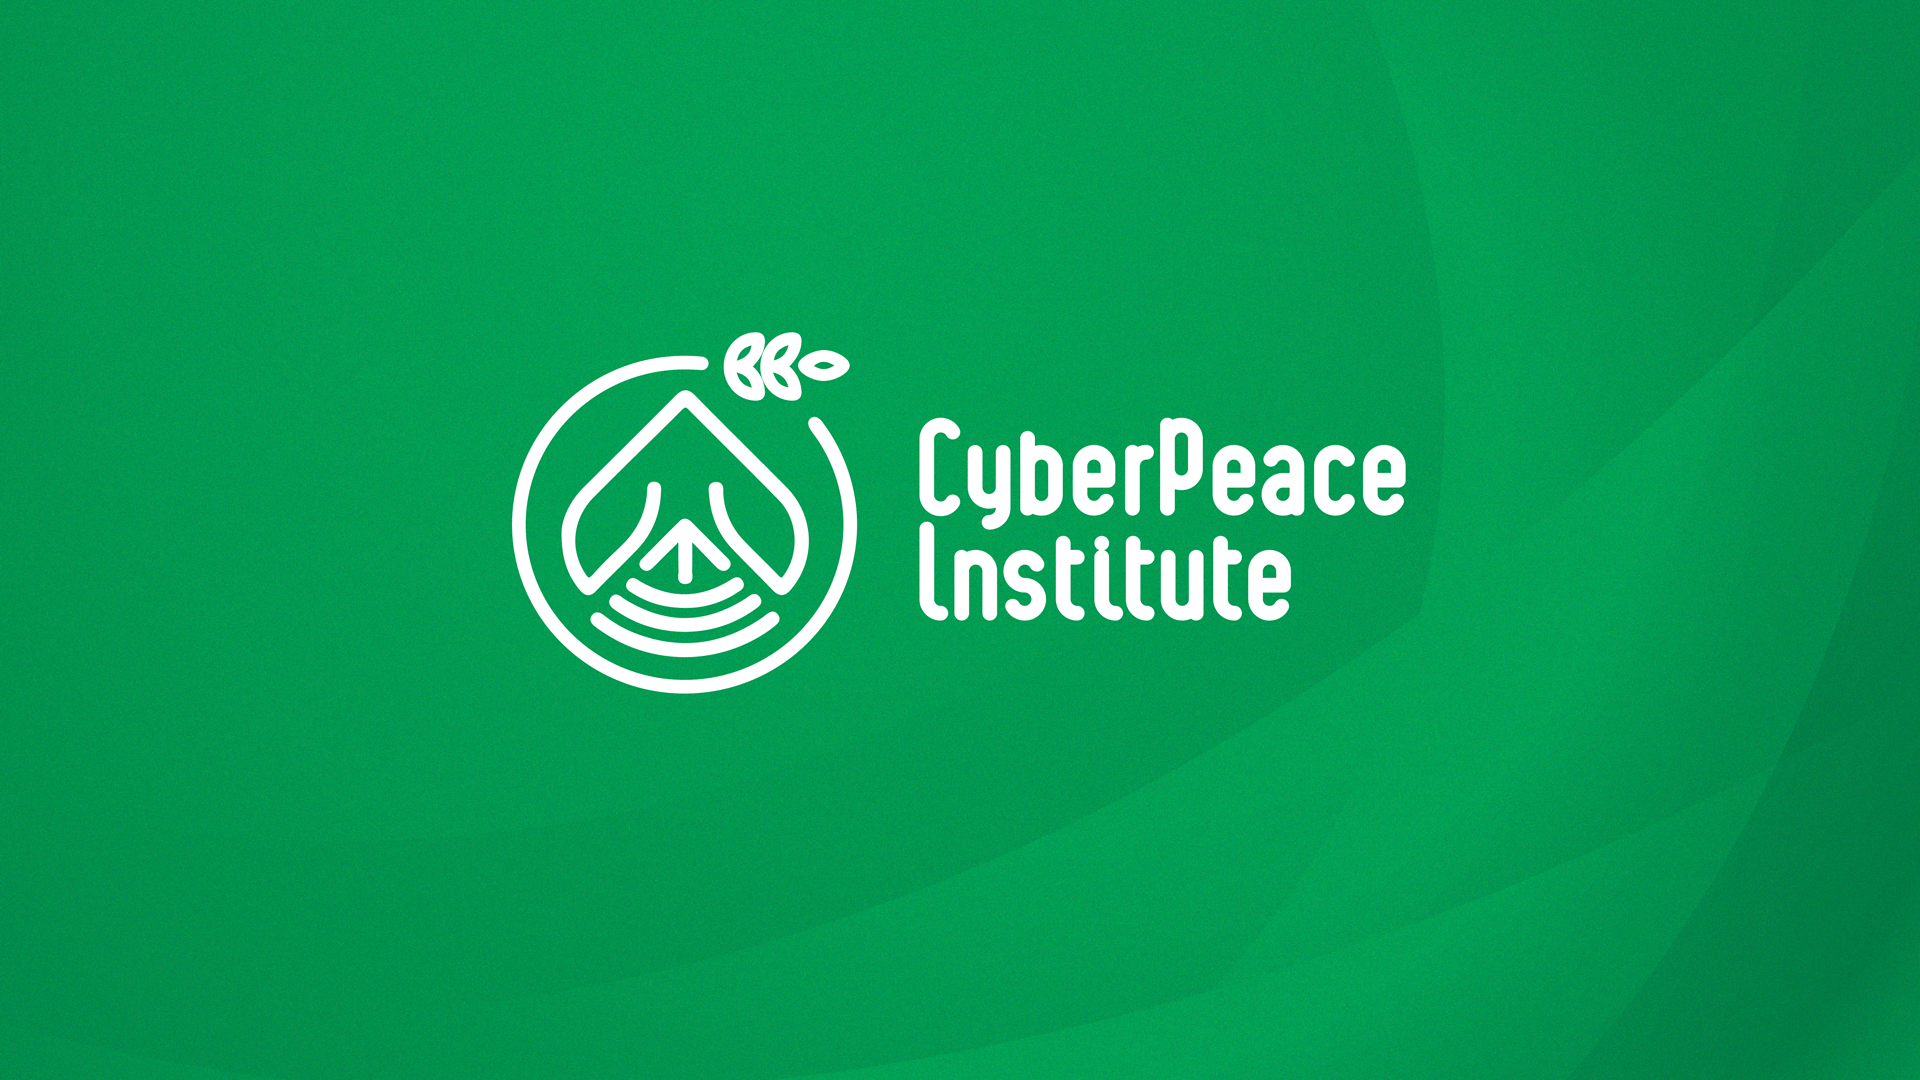 Announcement regarding the President of the CyberPeace Institute